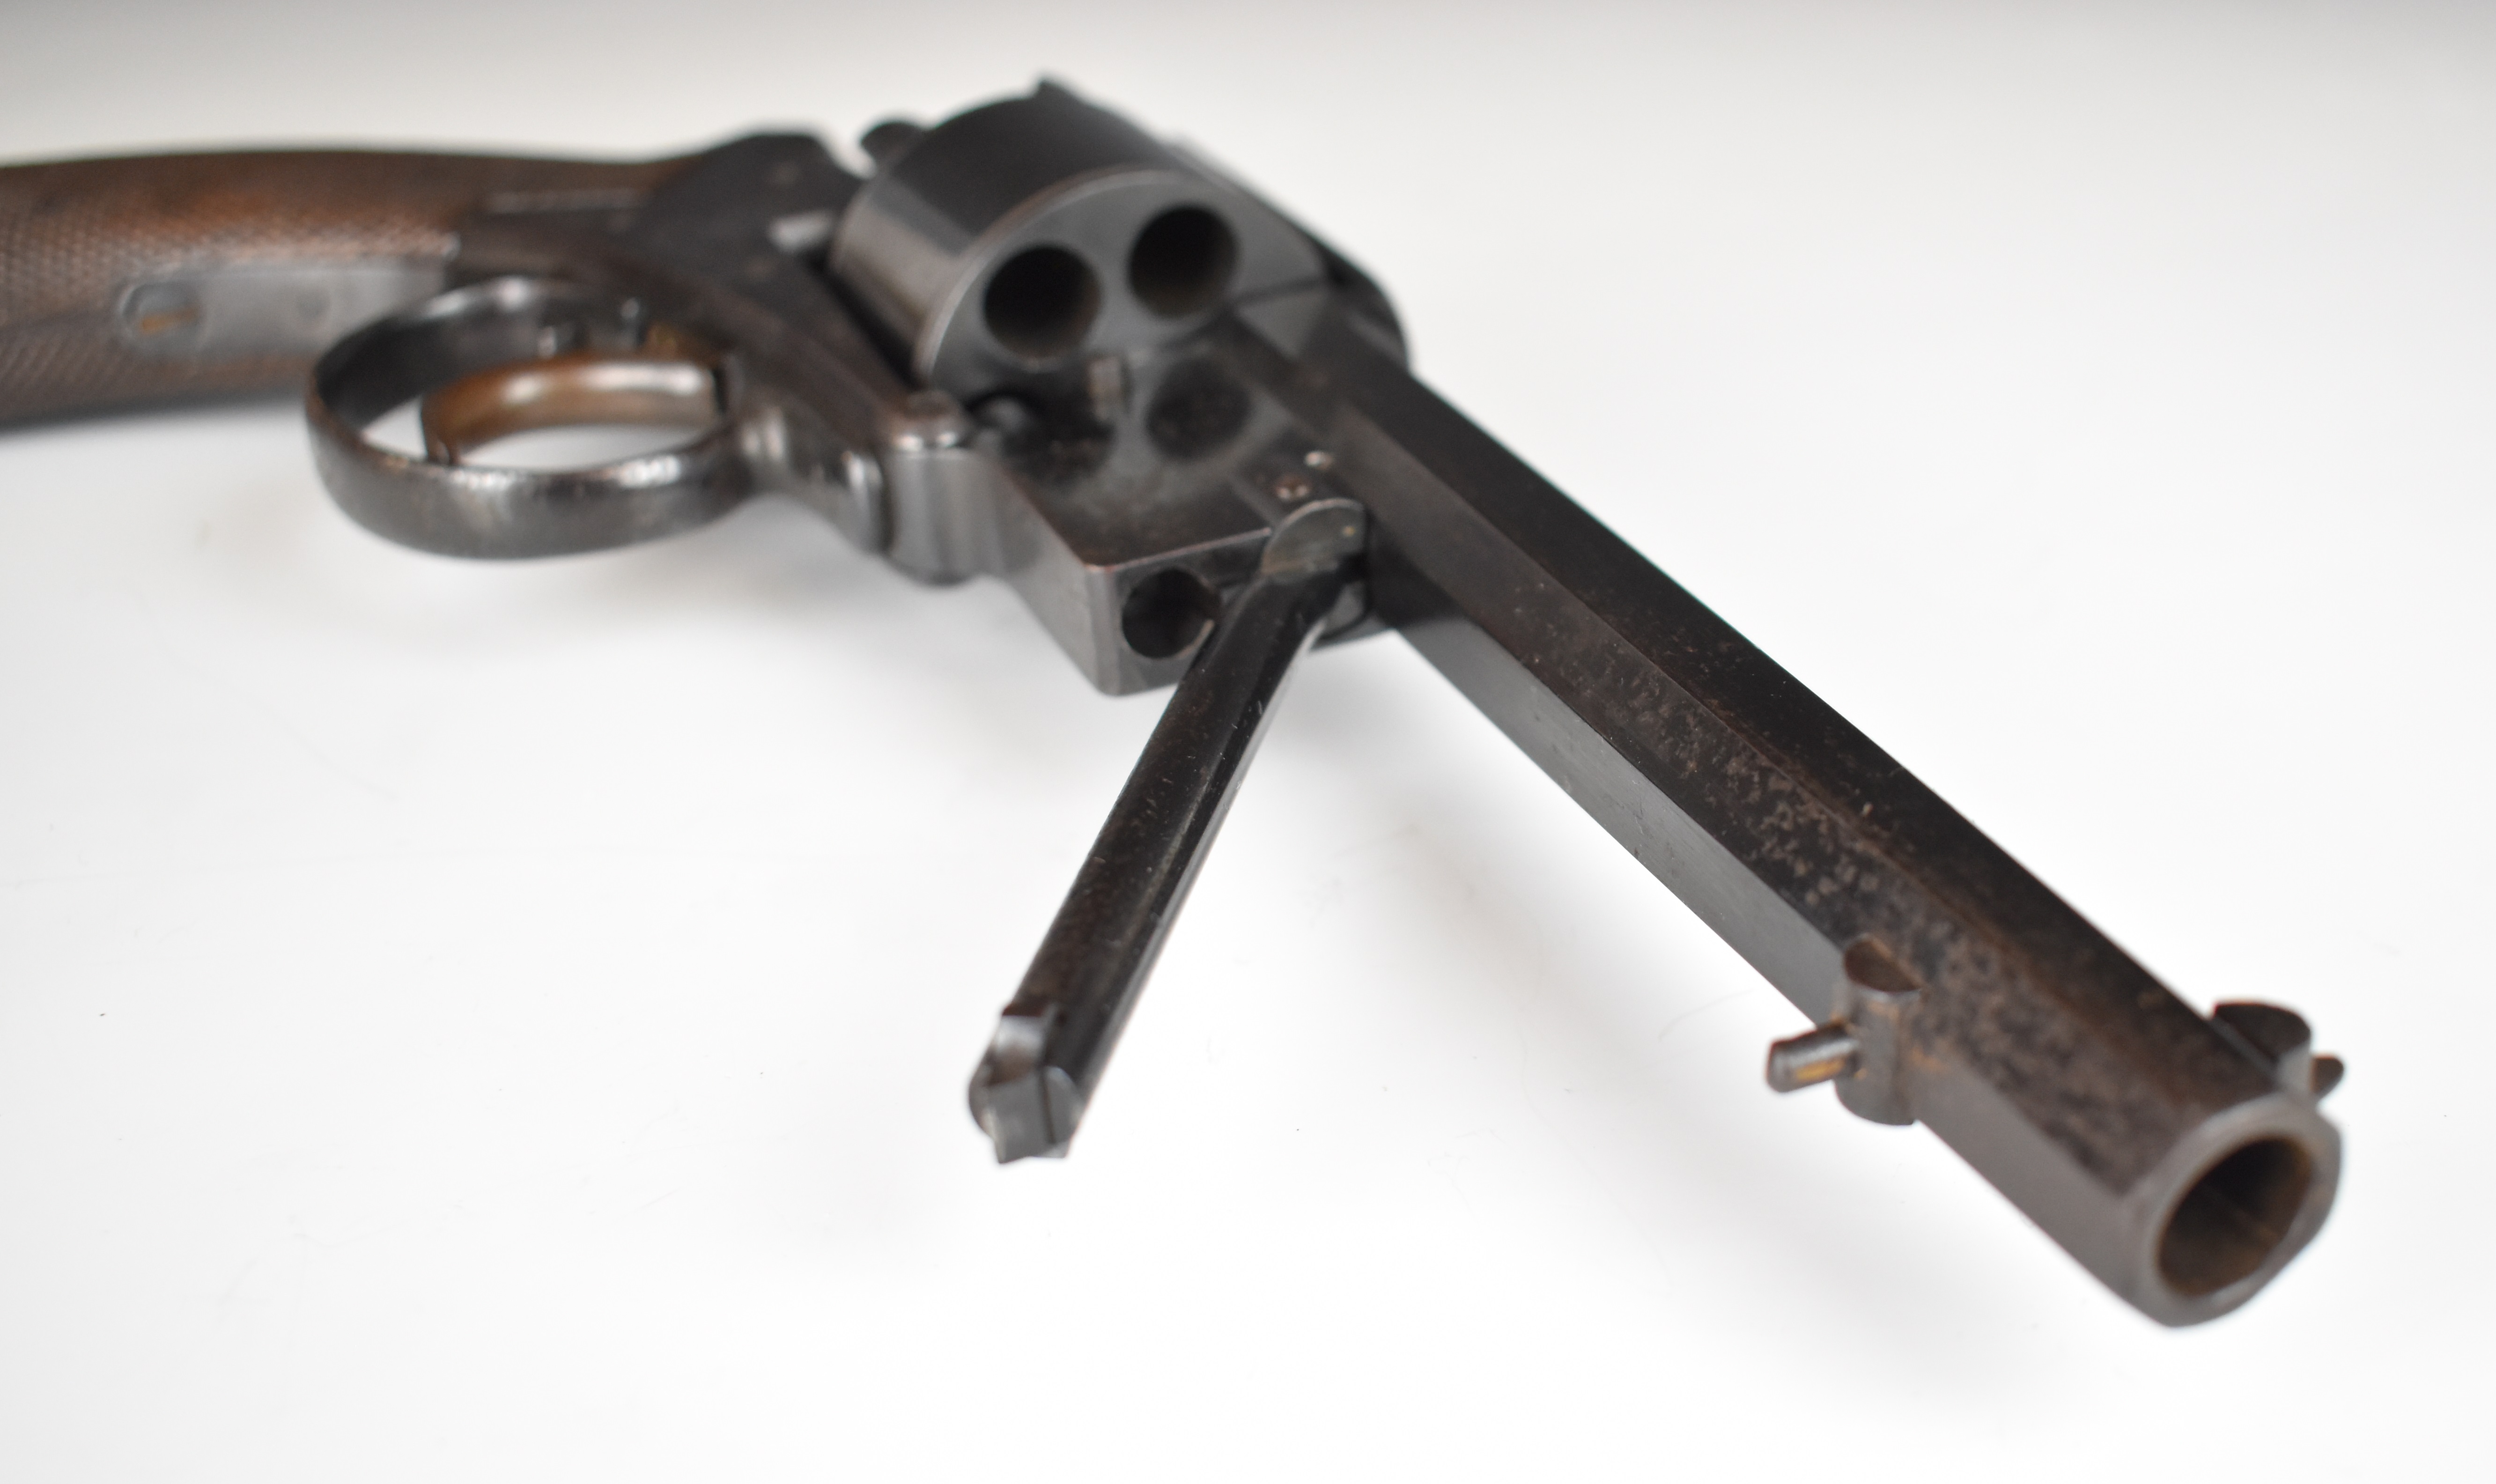 Adam's Patent 50 bore six-shot double-action revolver with chequered grip, line engraved cylinder, - Image 6 of 30